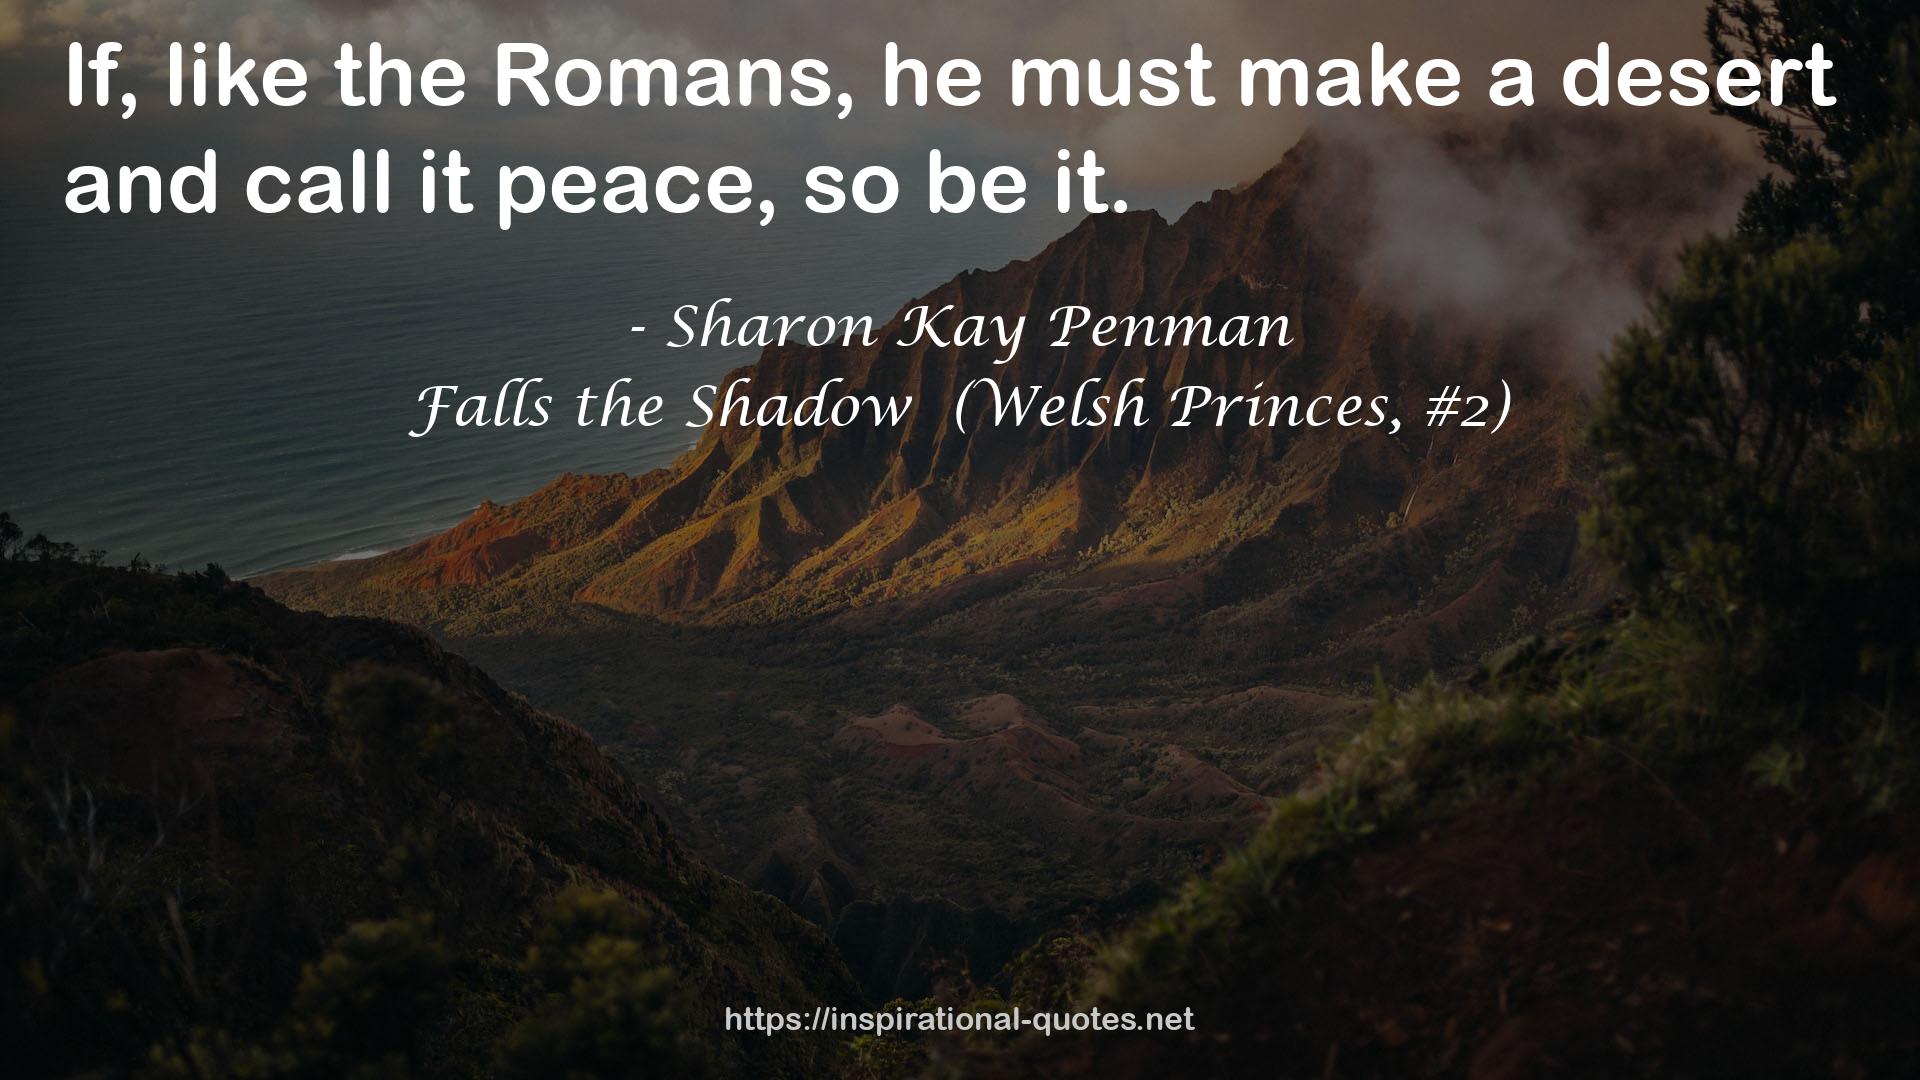 Falls the Shadow  (Welsh Princes, #2) QUOTES